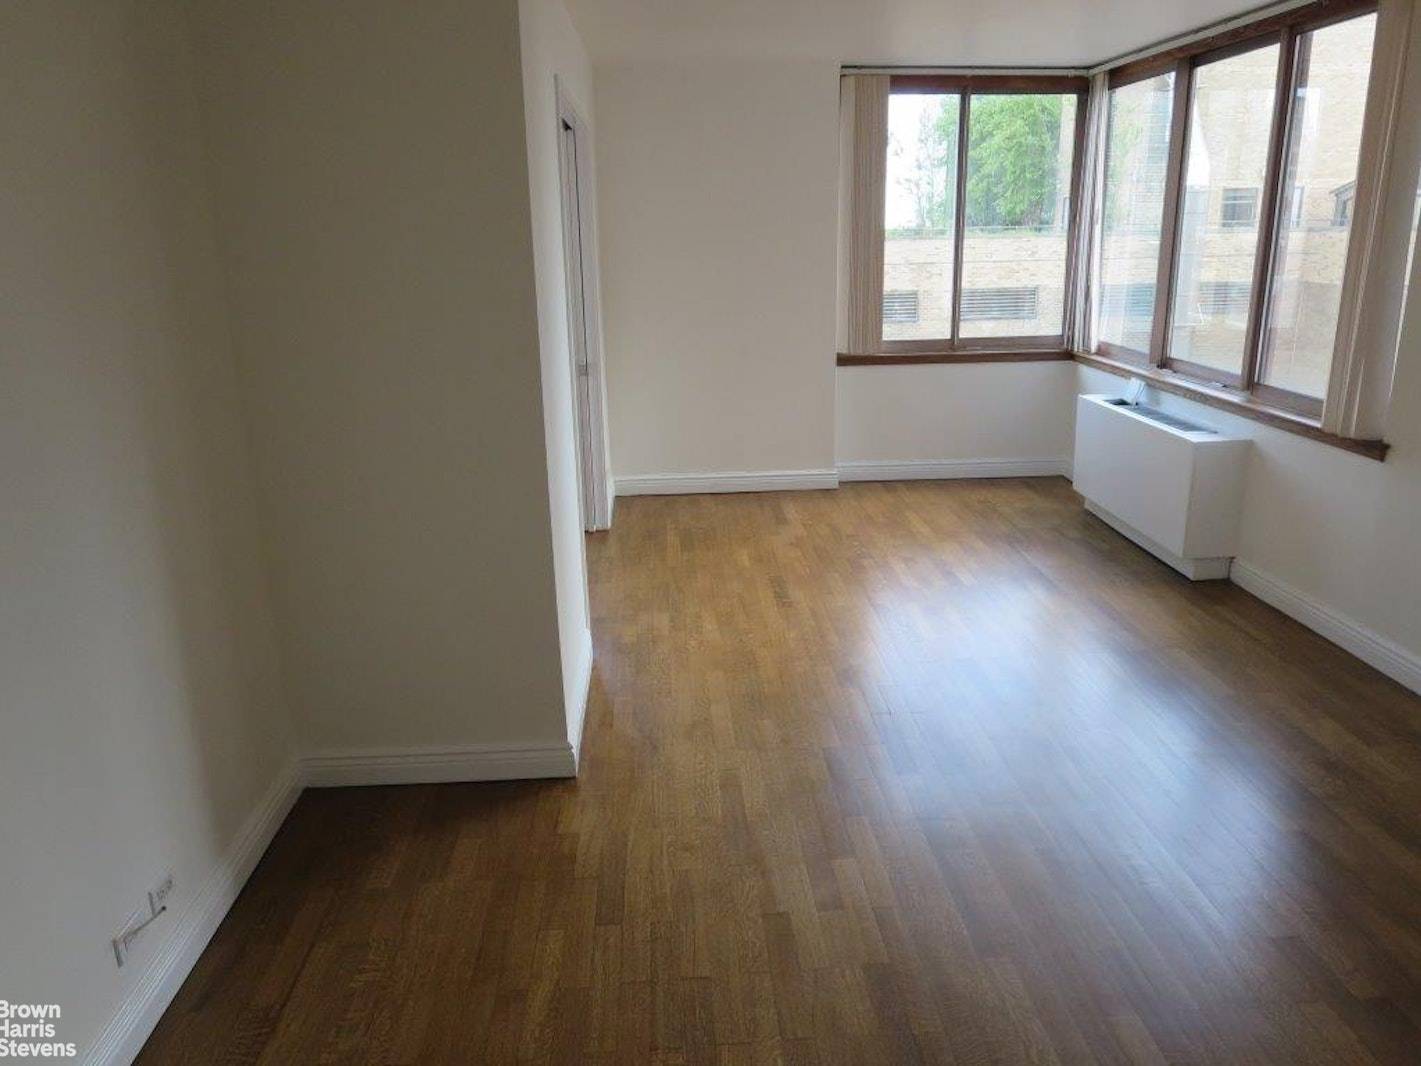 NEGOTIABLE RENTSpacious 2 BR, 1 and half marble baths facing south east corner unit of the building.